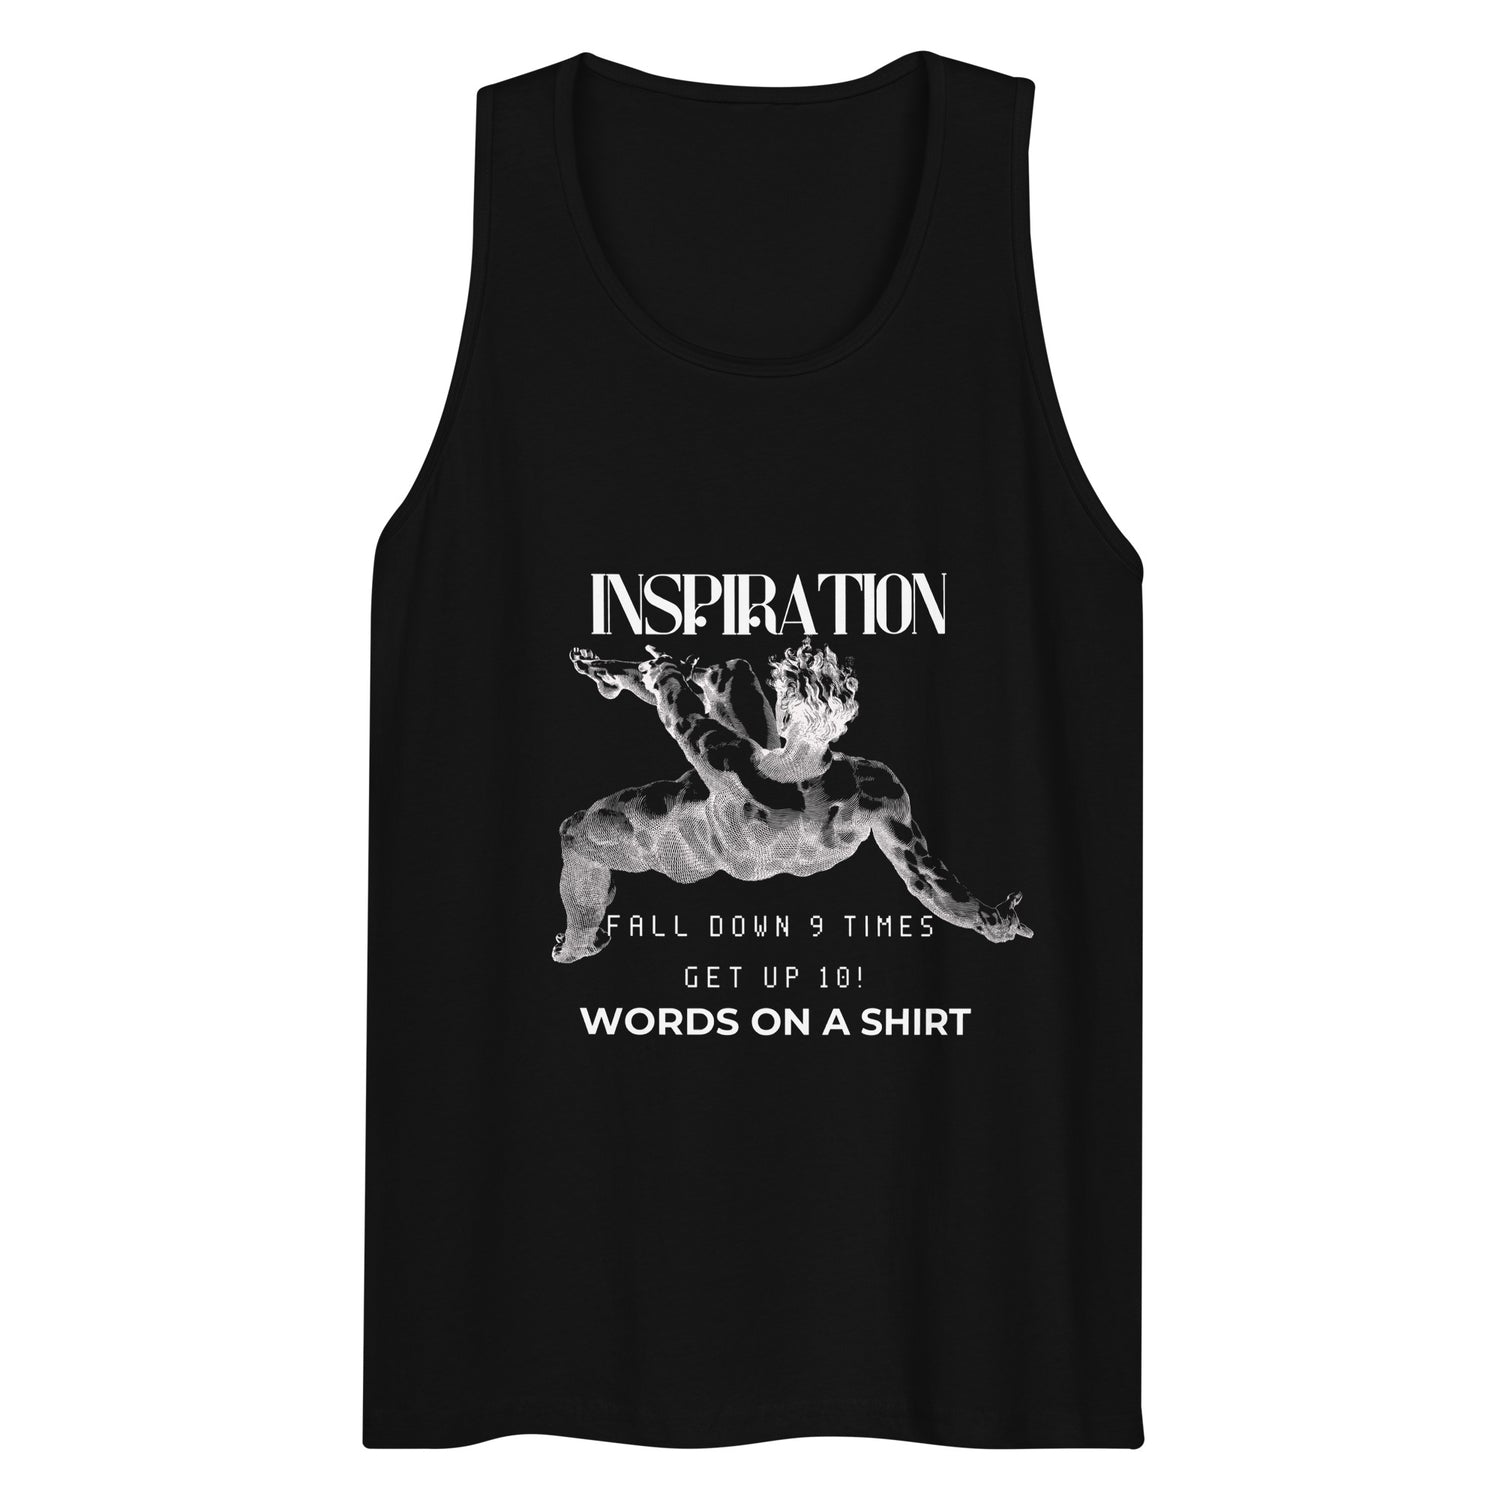 Upgrade your wardrobe with top-quality essentials that are both stylish and long-lasting. This men's premium tank top is ultra-soft and made with durable materials, perfect for wearing as a workout shirt or layering item. Plus, our inspirational quote will keep you motivated: "Fall down 9 times, get up 10!"